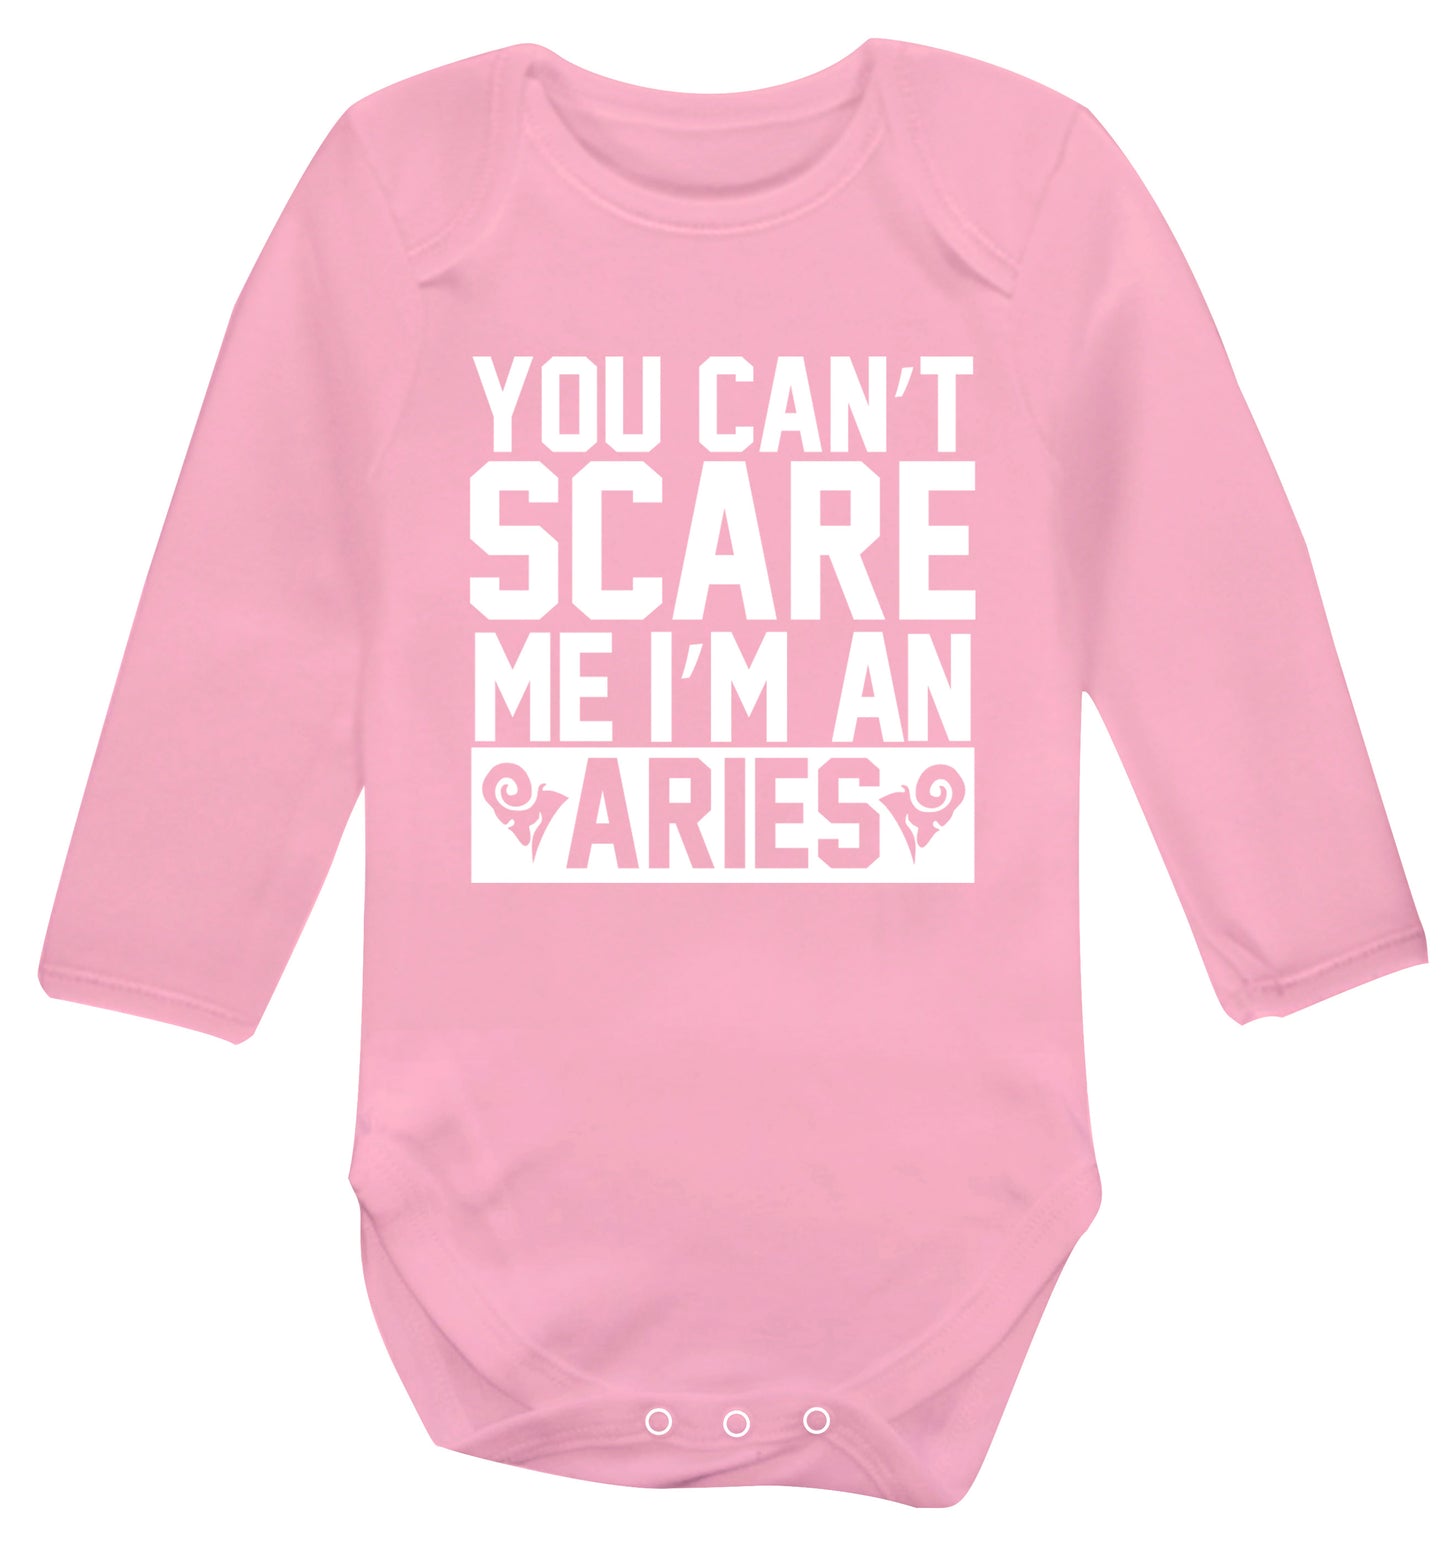 You can't scare me I'm an aries Baby Vest long sleeved pale pink 6-12 months